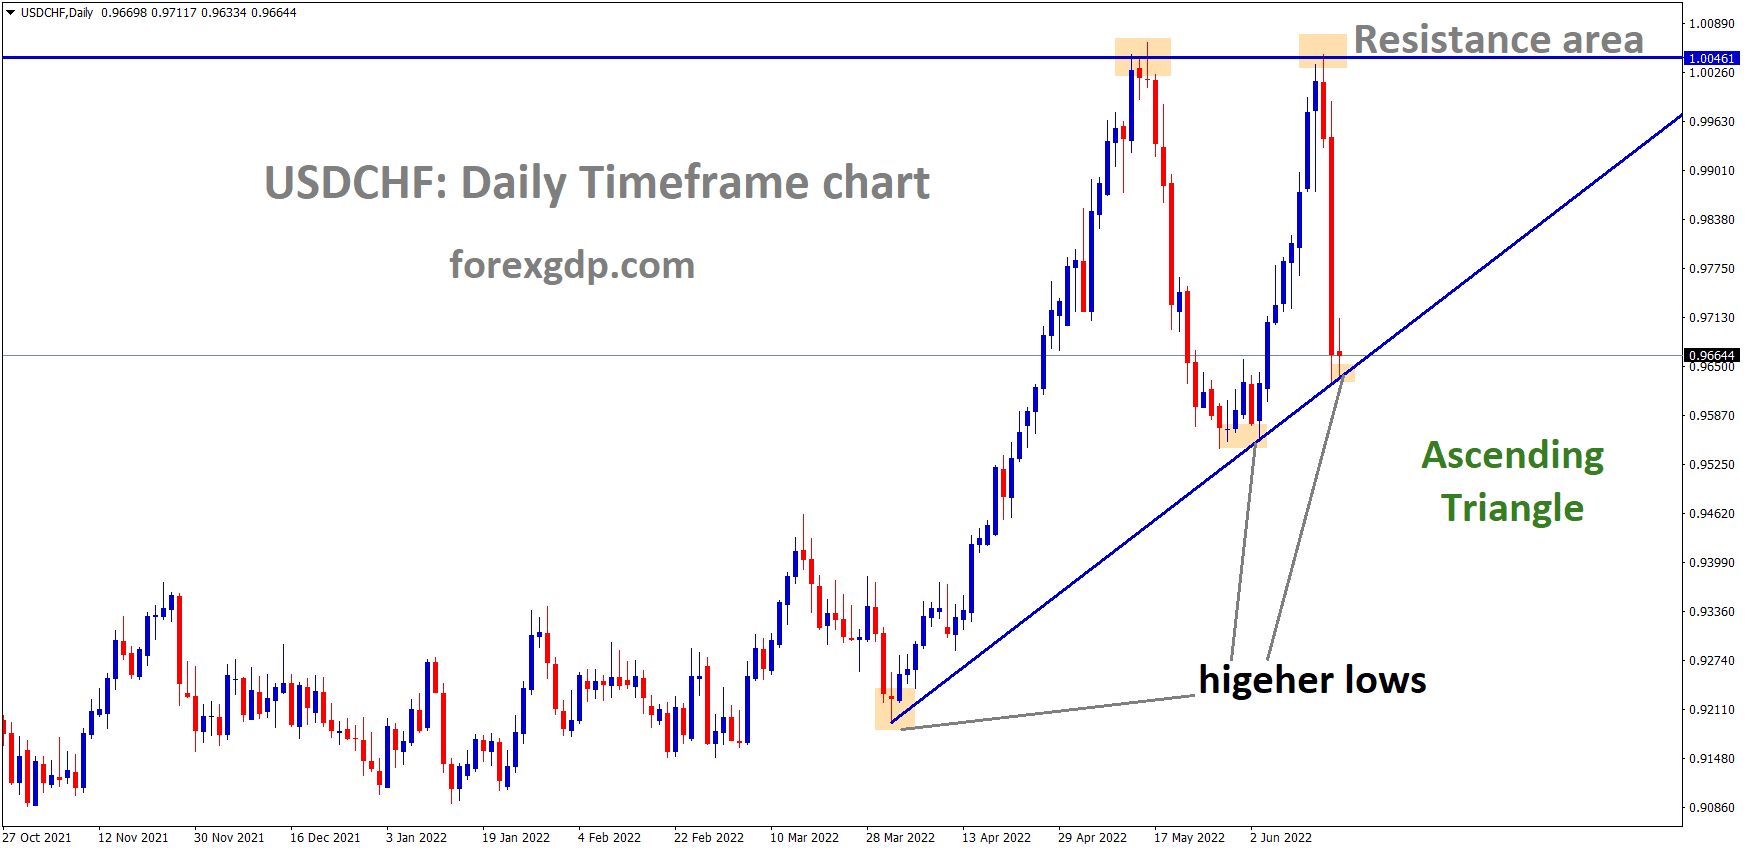 USDCHF is moving in an Ascending triangle pattern and the Market has reached the higher low area of the triangle pattern